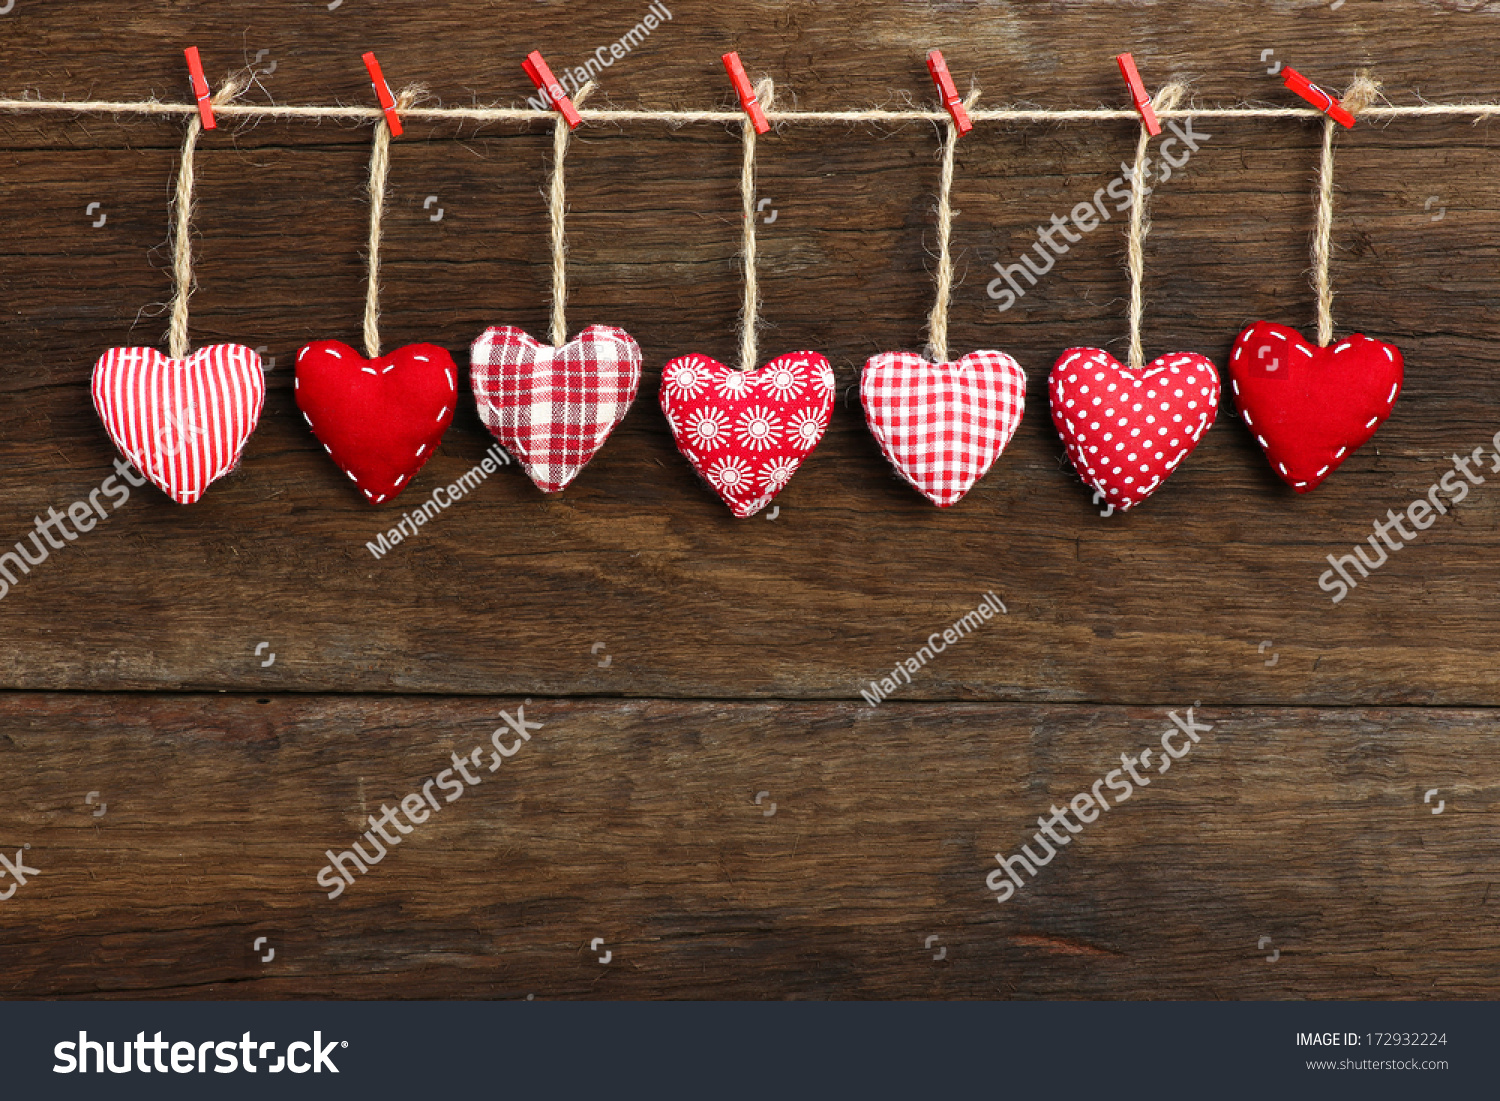 Gingham Love Valentine's hearts natural cord and red clips hanging on rustic driftwood texture background, copy space #172932224